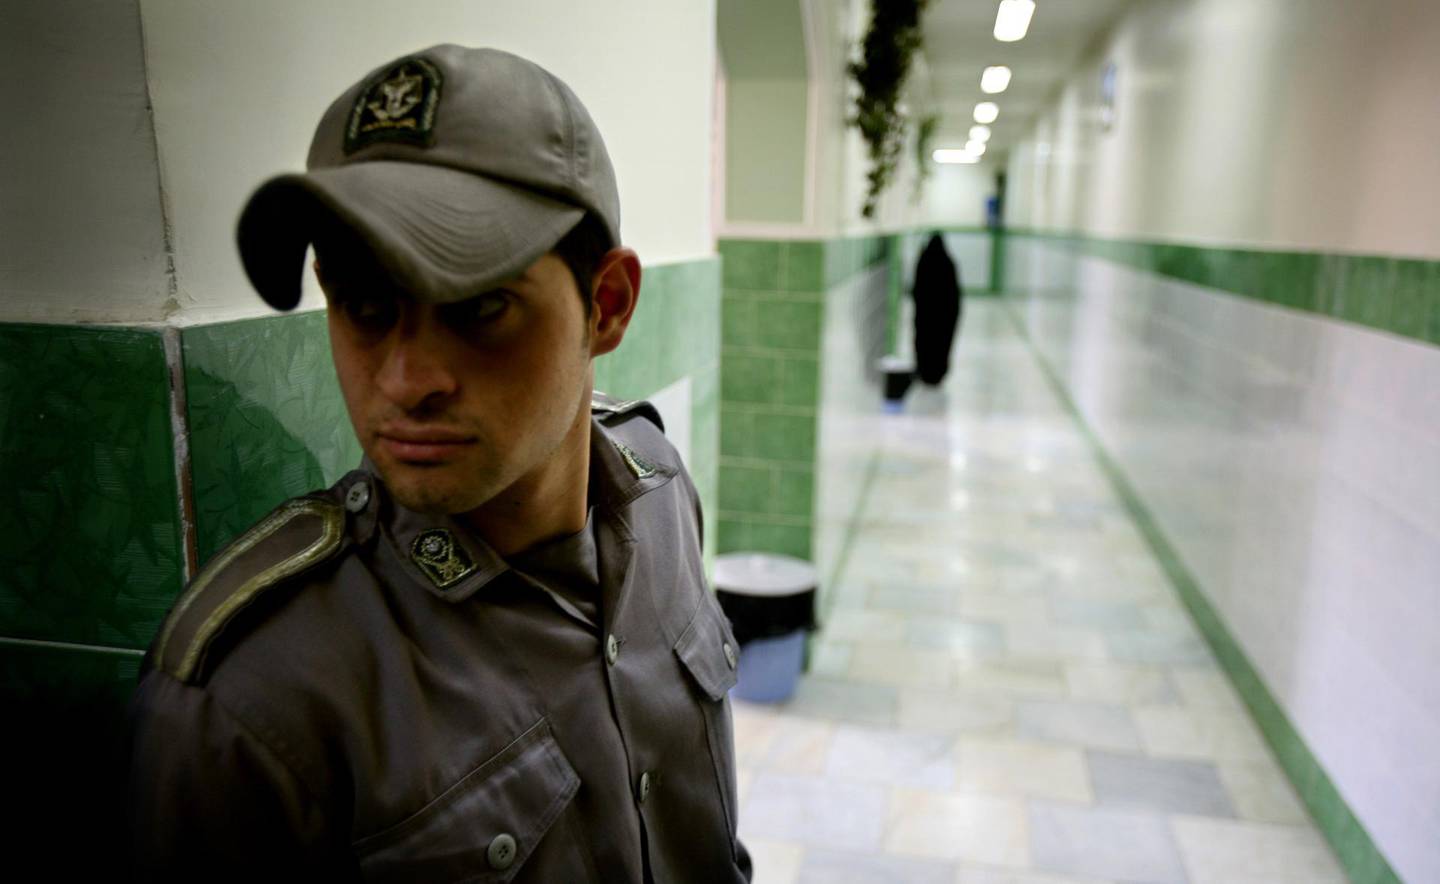 A prison guard stands along a corridor in Tehran's Evin prison June 13, 2006. Iranian police detained 70 people at a demonstration in favour of women's rights, the judiciary said on Tuesday, adding it was ready to review reports that the police had beaten some demonstrators.  REUTERS/Morteza Nikoubazl (IRAN)